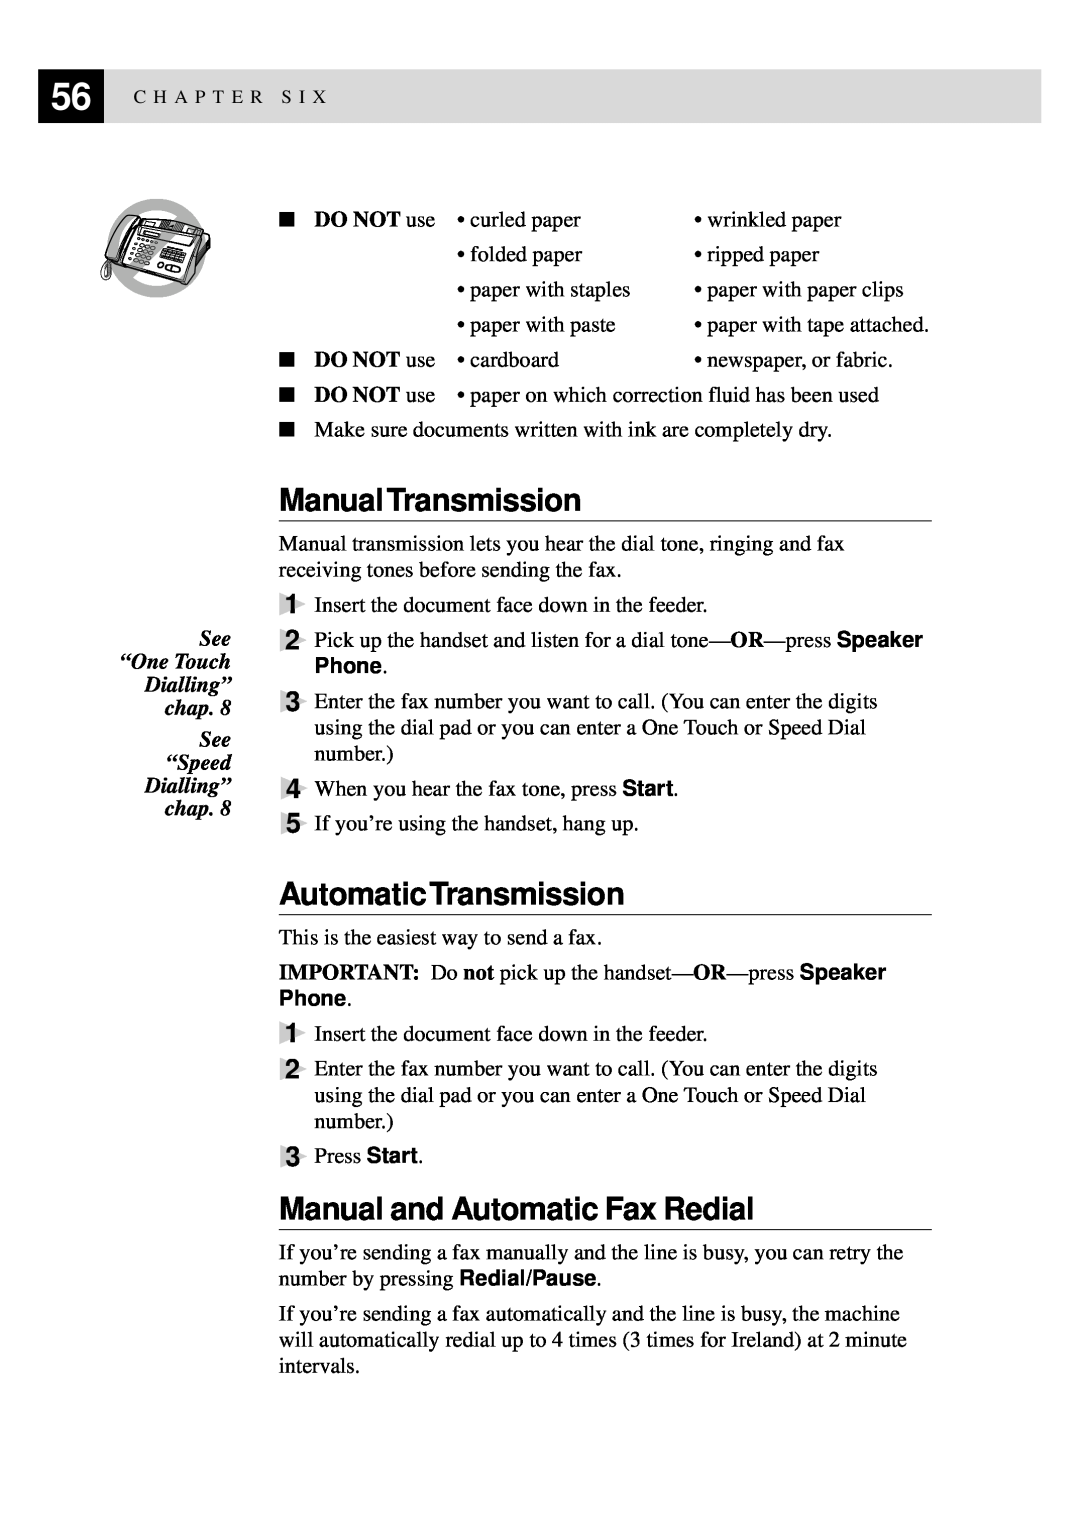 Brother 515 manual Manual Transmission, Automatic Transmission, Manual and Automatic Fax Redial, DO NOT use 